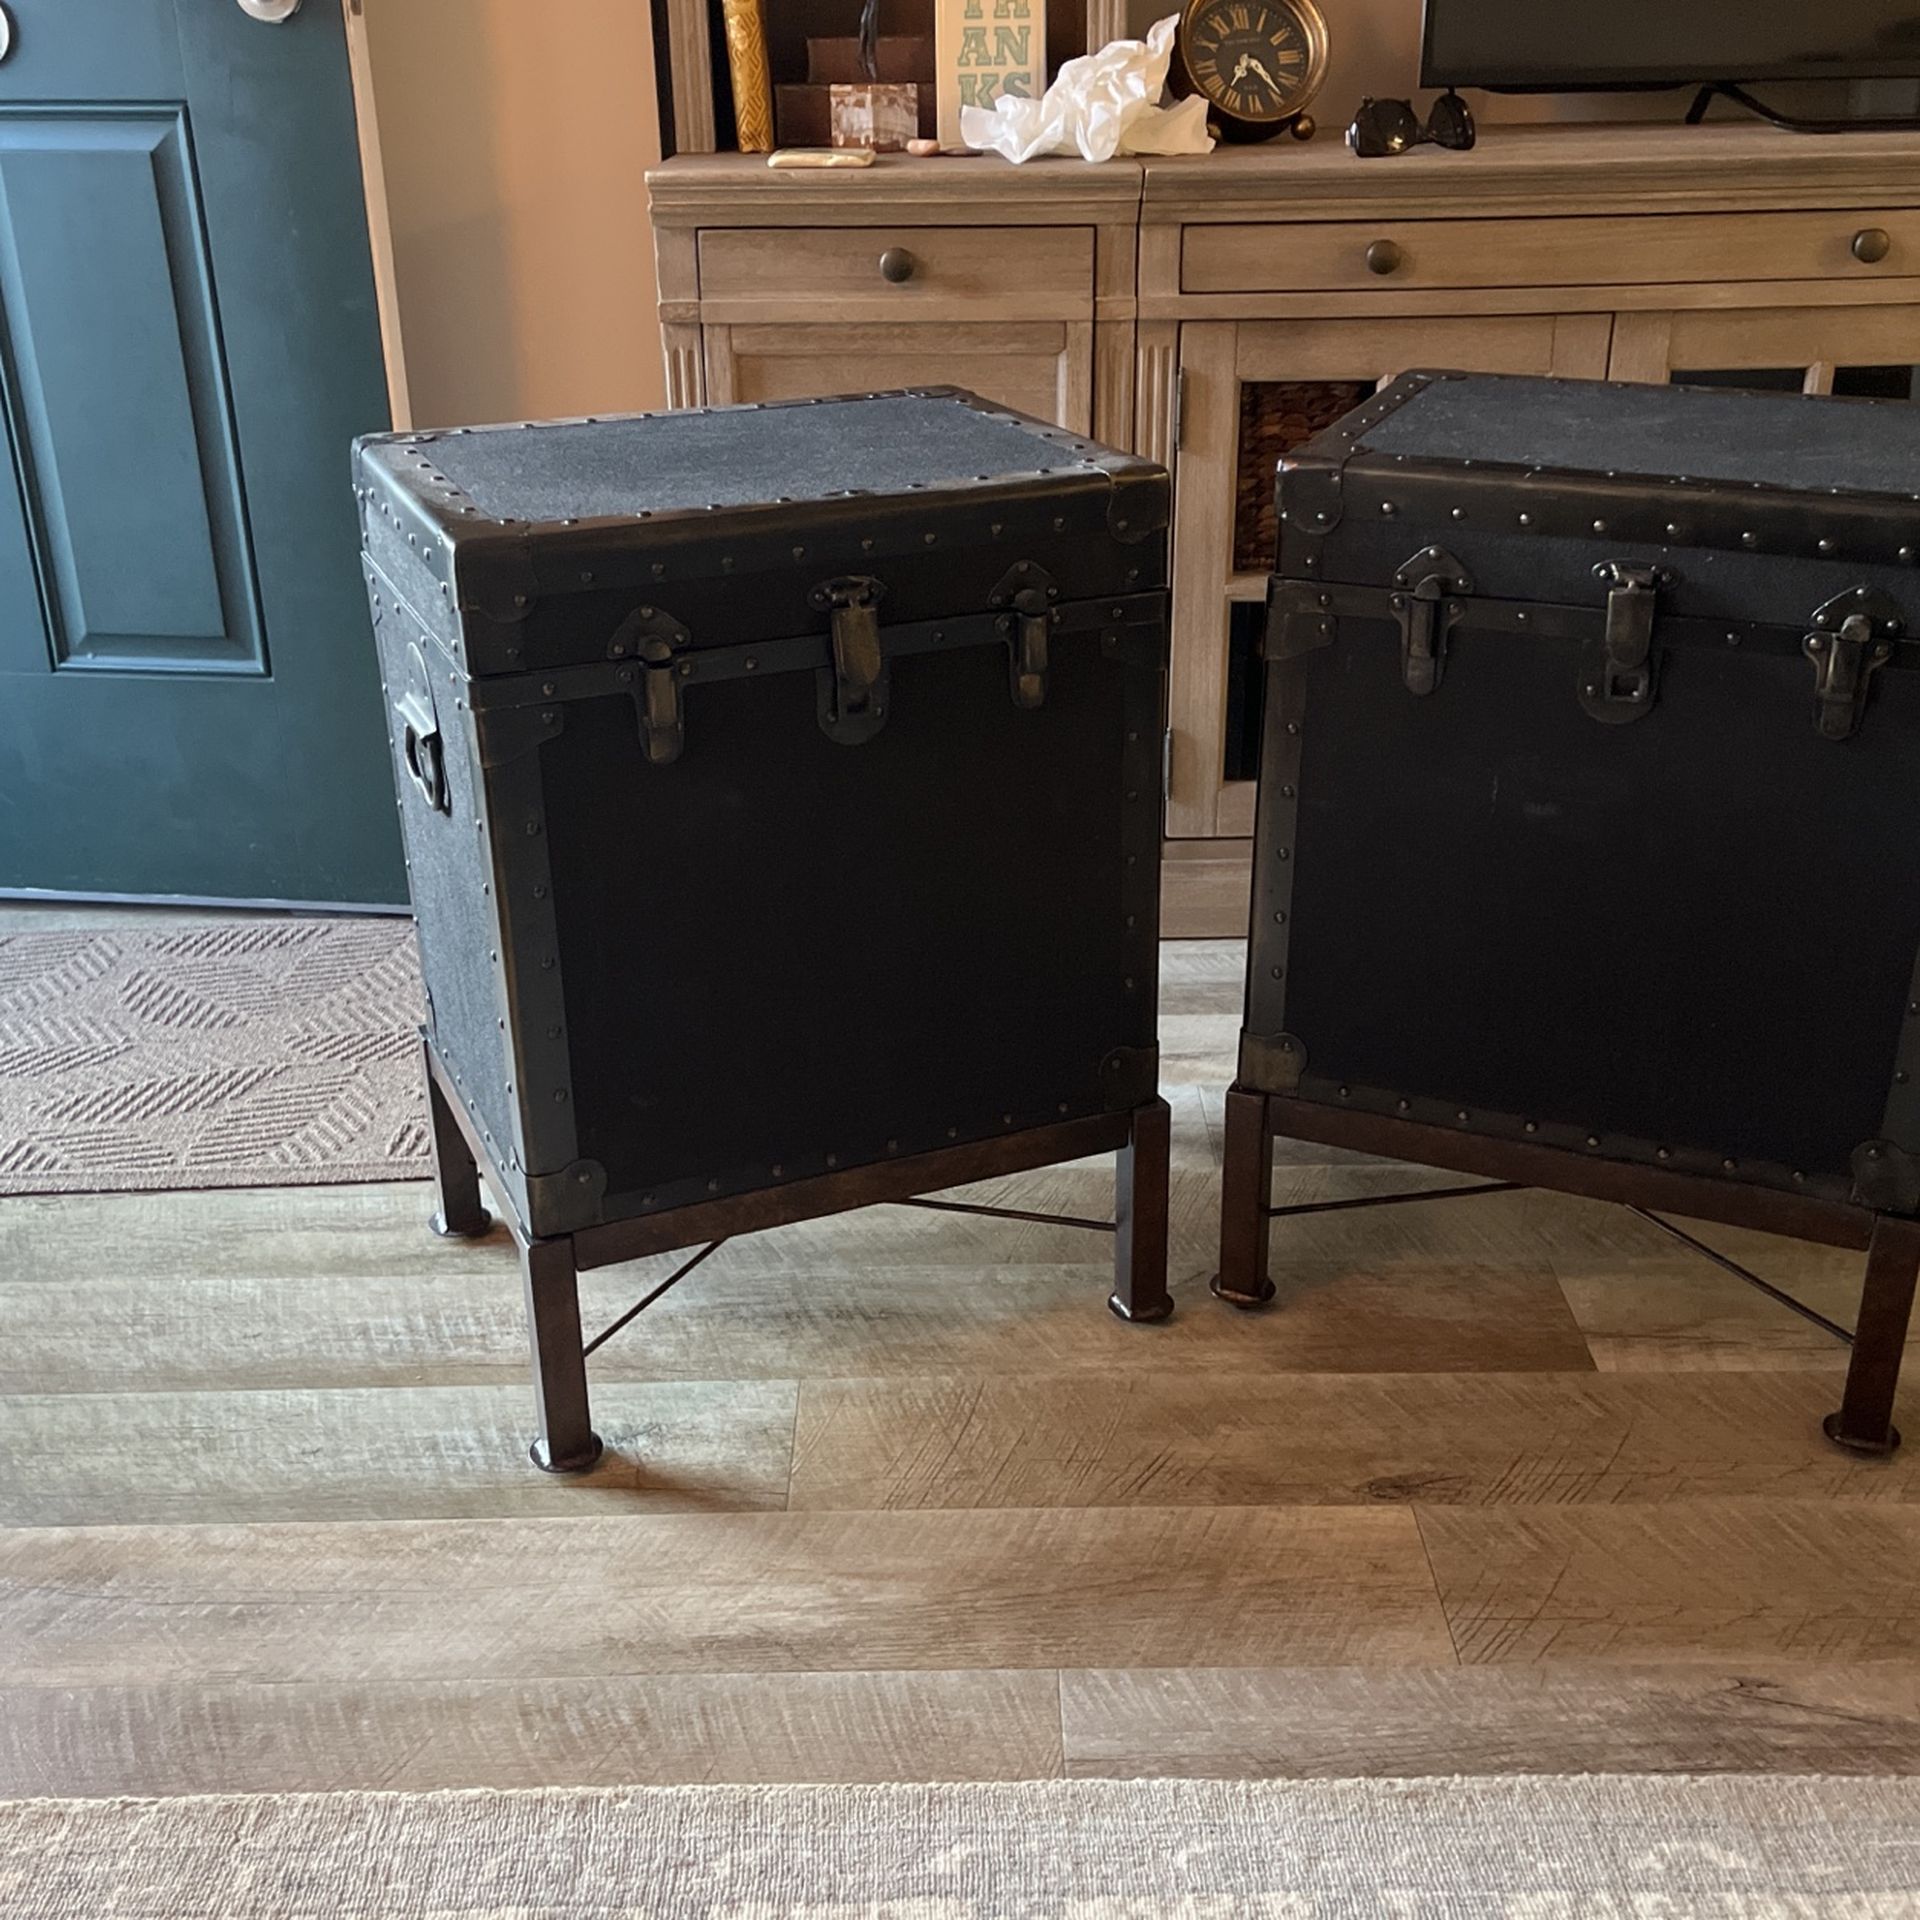 End Table Trunks Pottery Barn 18 Long  14wide 25 Tall Black With Bronze Black Hardware 